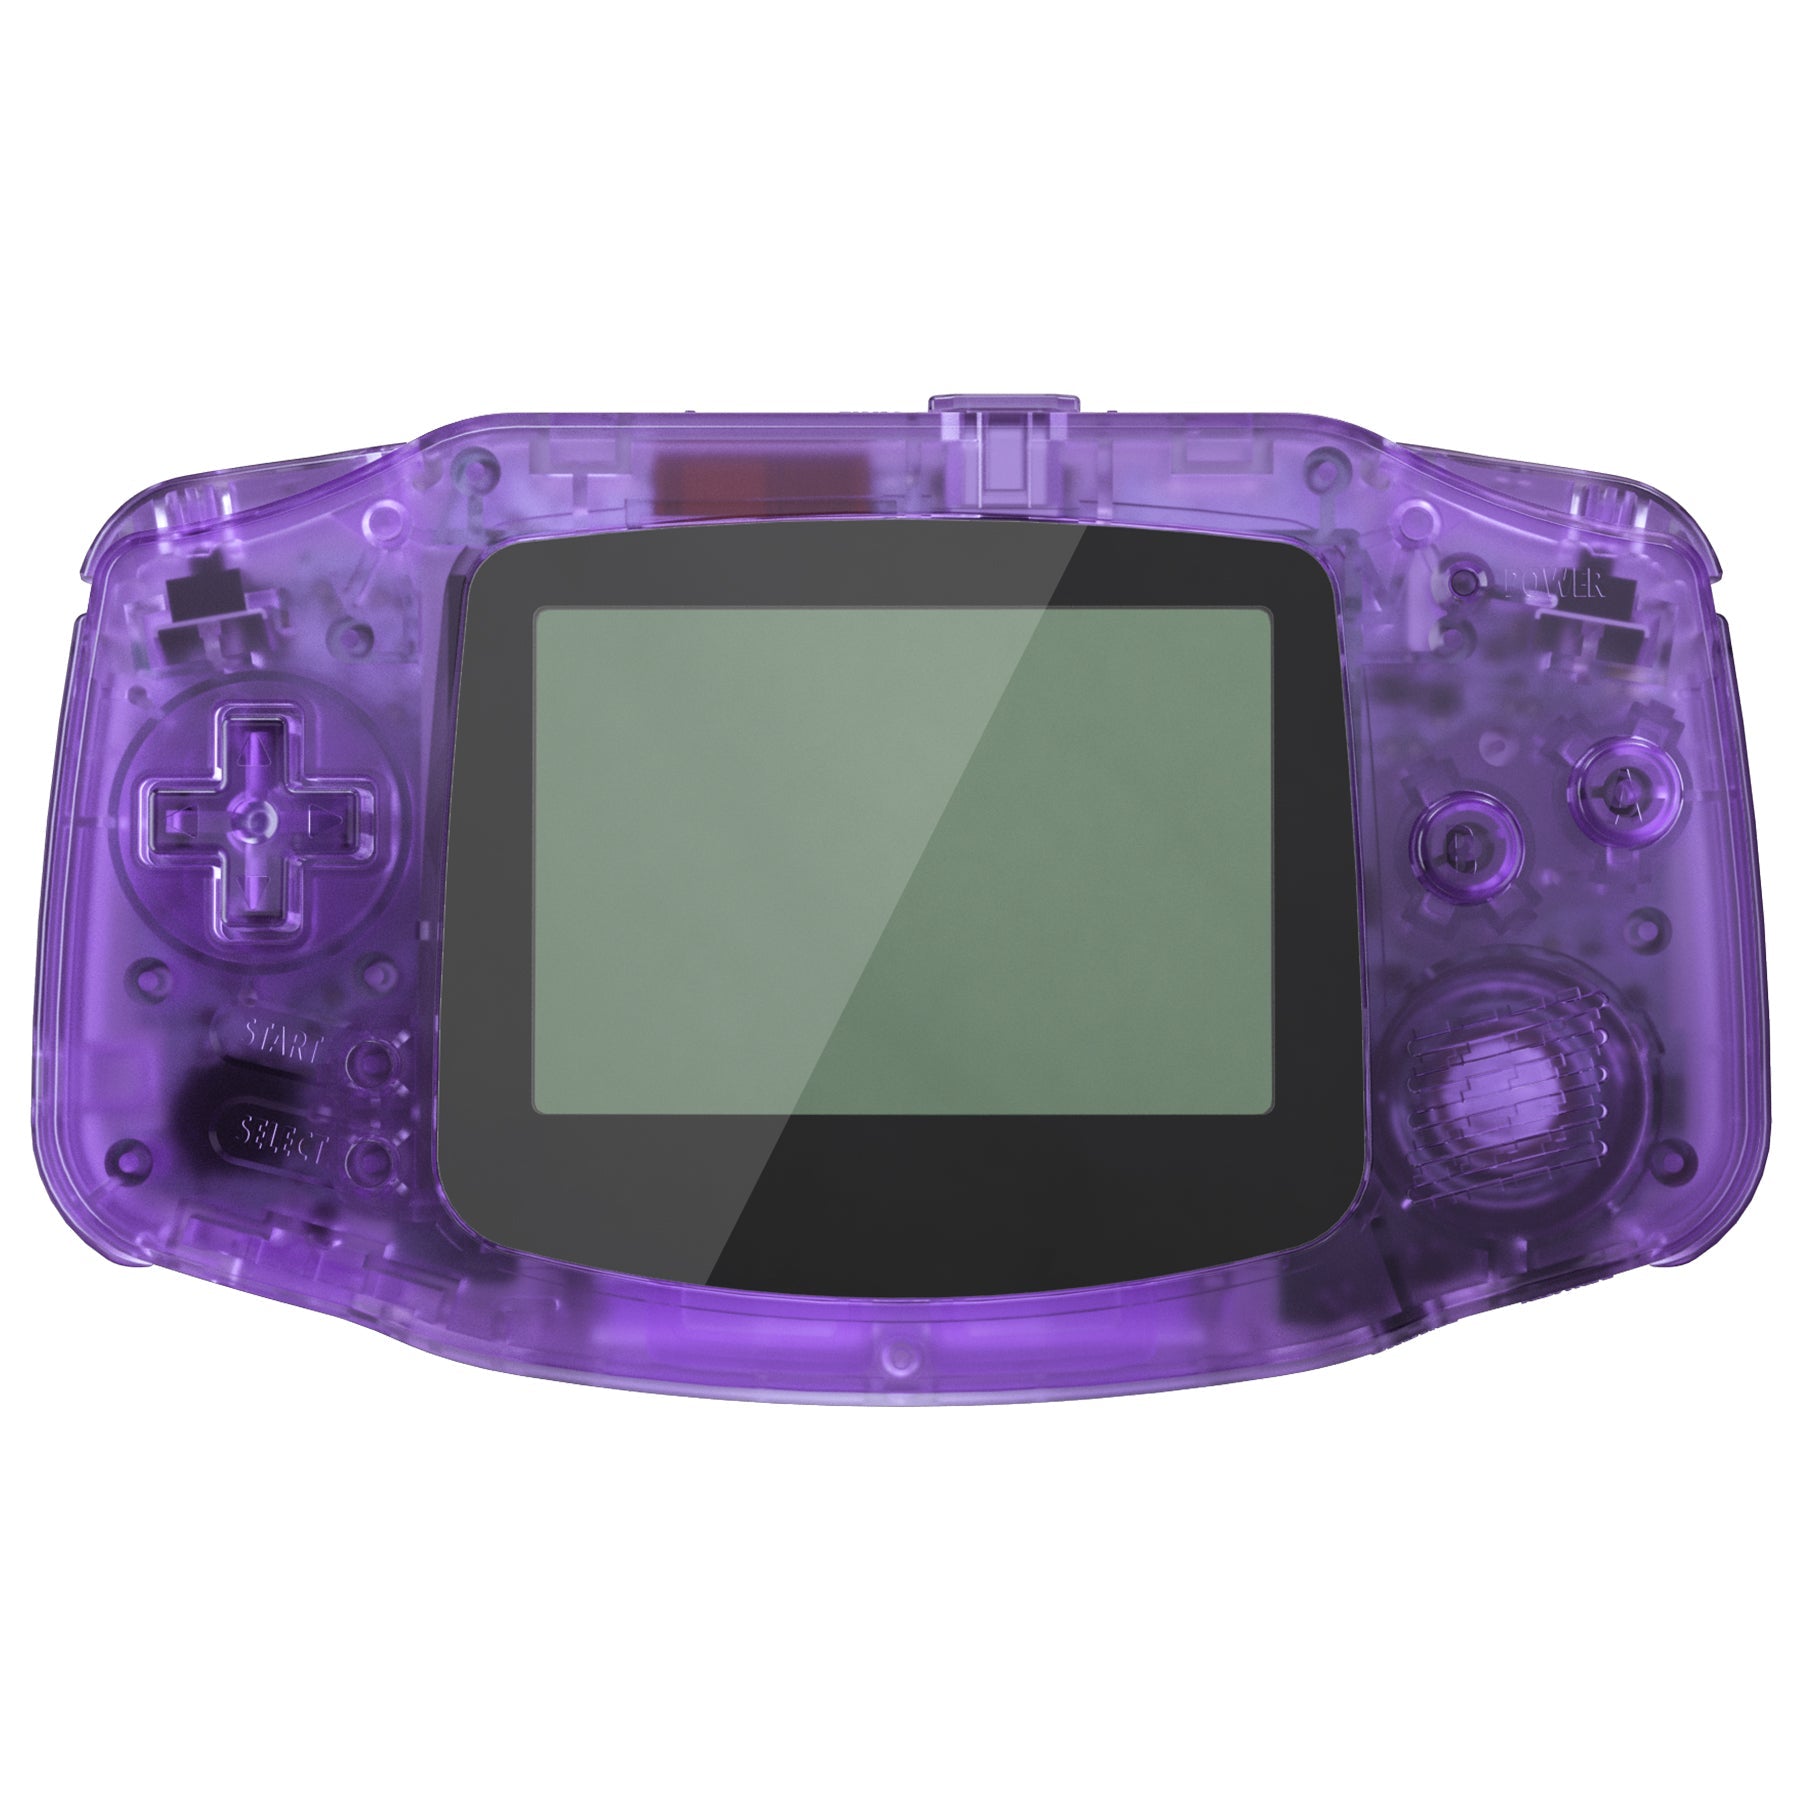 IPS Ready Upgraded eXtremeRate Clear Atomic Purple Replacement Shell Full  Housing Cover + Buttons for Gameboy Advance GBA – Compatible with Both IPS  